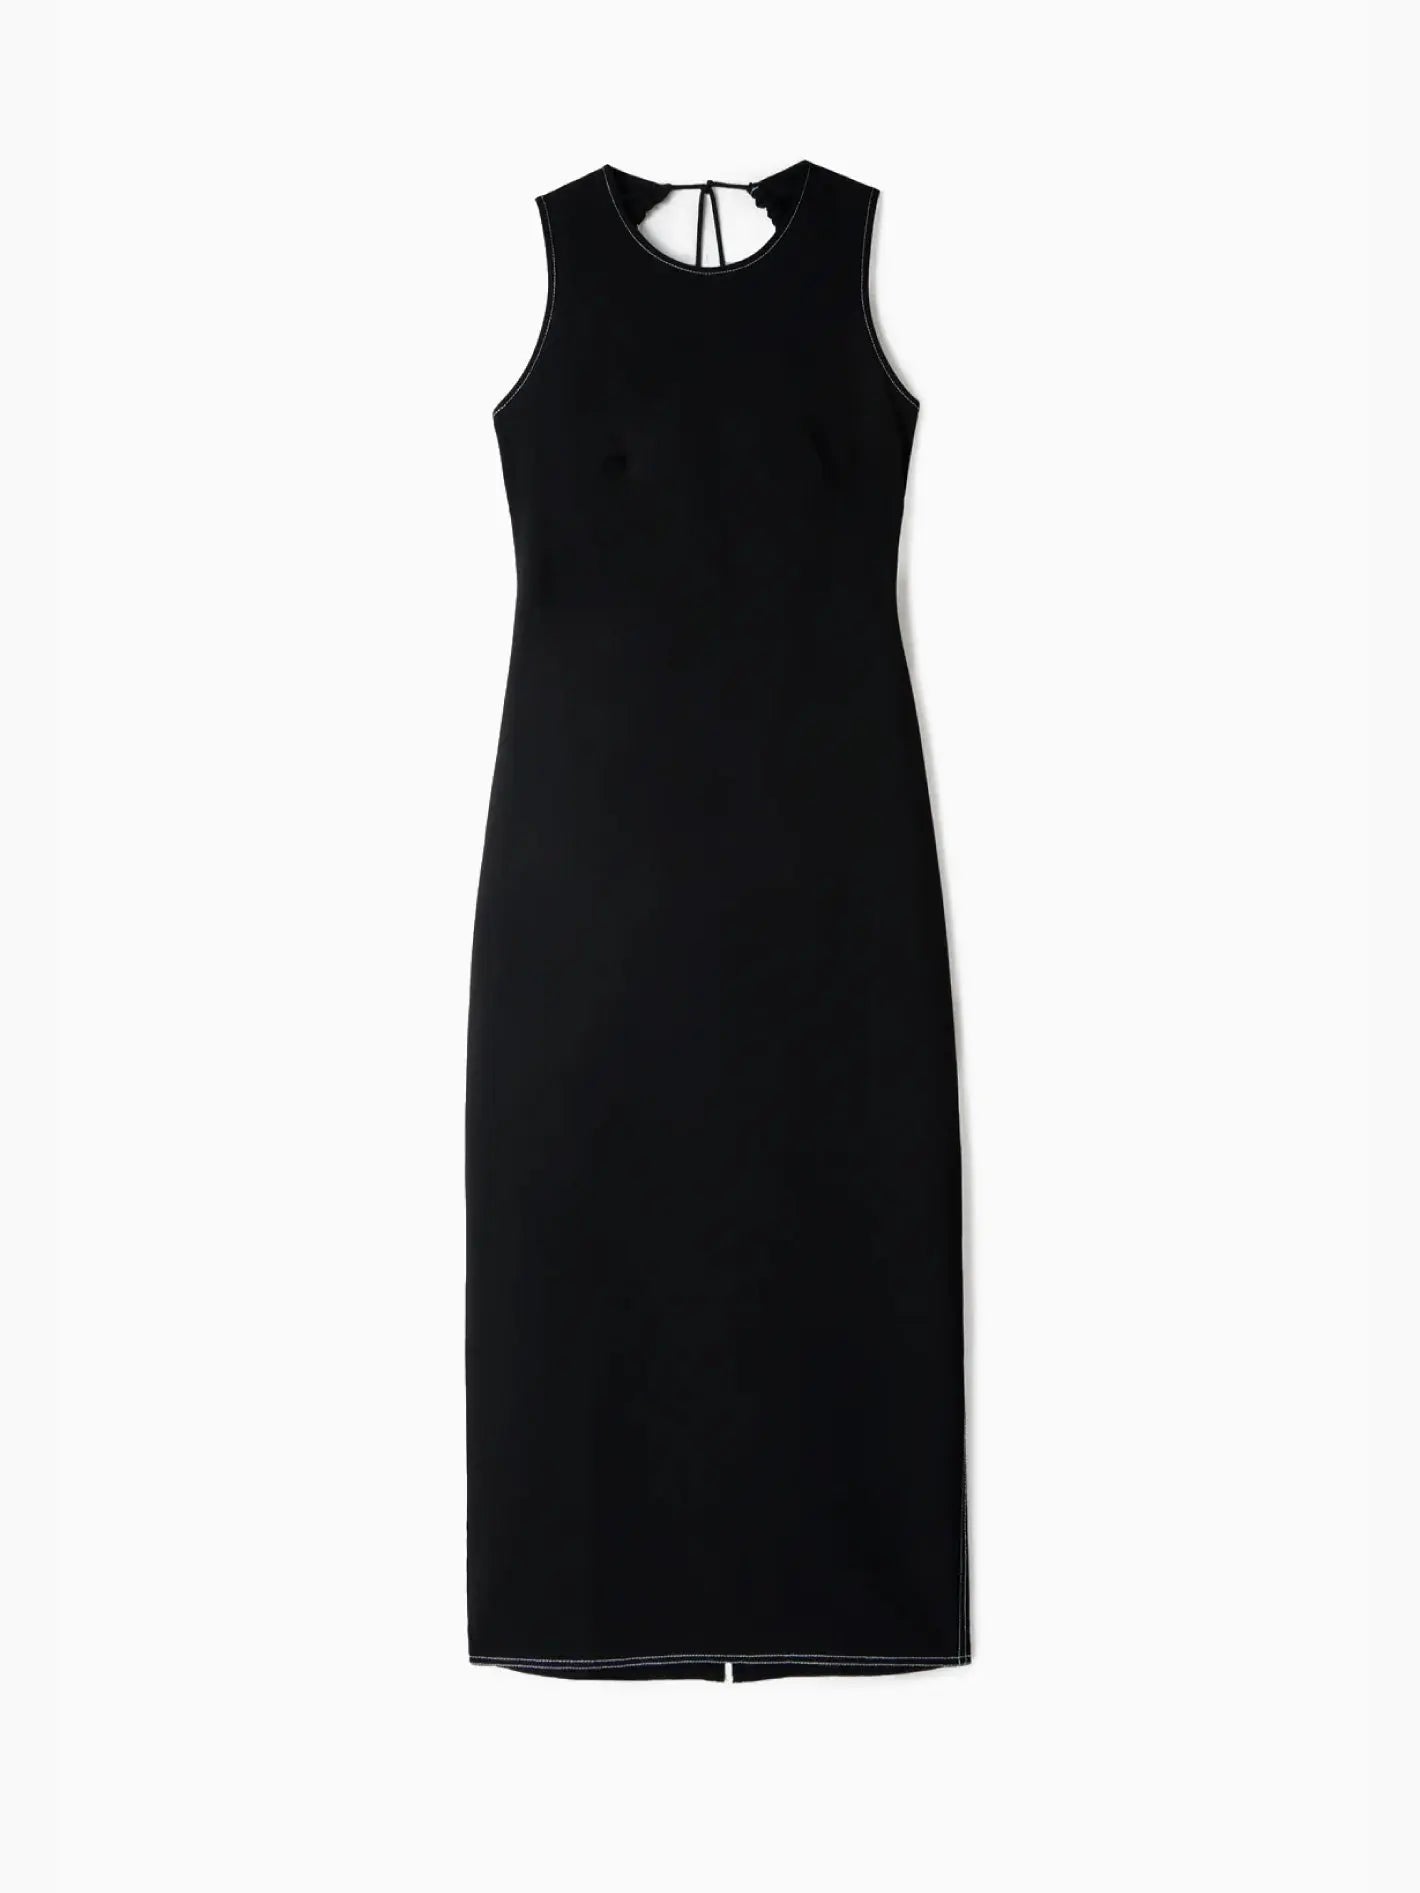 Sleeveless, black midi dress with a fitted silhouette. The Buco Dress Black by Sunnei features a crew neckline and a keyhole back detail, creating a simple yet elegant look. Available at Bassalstore in Barcelona, this timeless piece is presented on a plain white background.